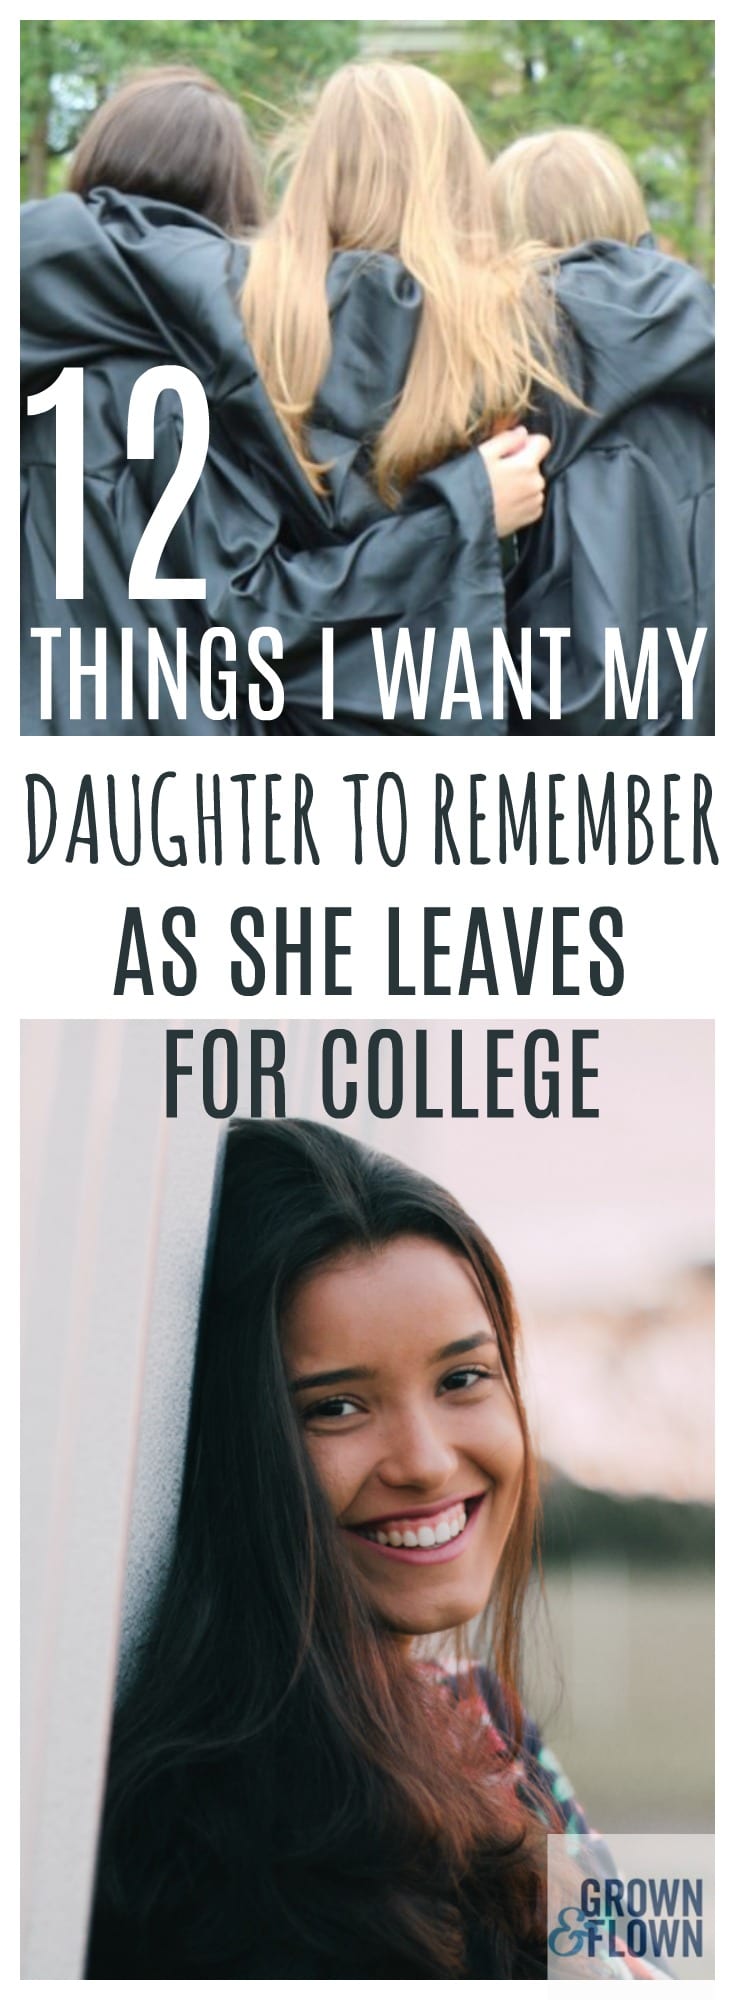 This inspirational blog post about motherhood and having your child leave the nest to head off to college is what every child and parent of college kids needs to read. From practical advice for your teen, to heartfelt reminders, this post is perfect for the teen moving away from home for the first time. #parenting #emptynest #teens #collegelife #collegeprep #raisingkids #raisingteens #college #graduation #teens